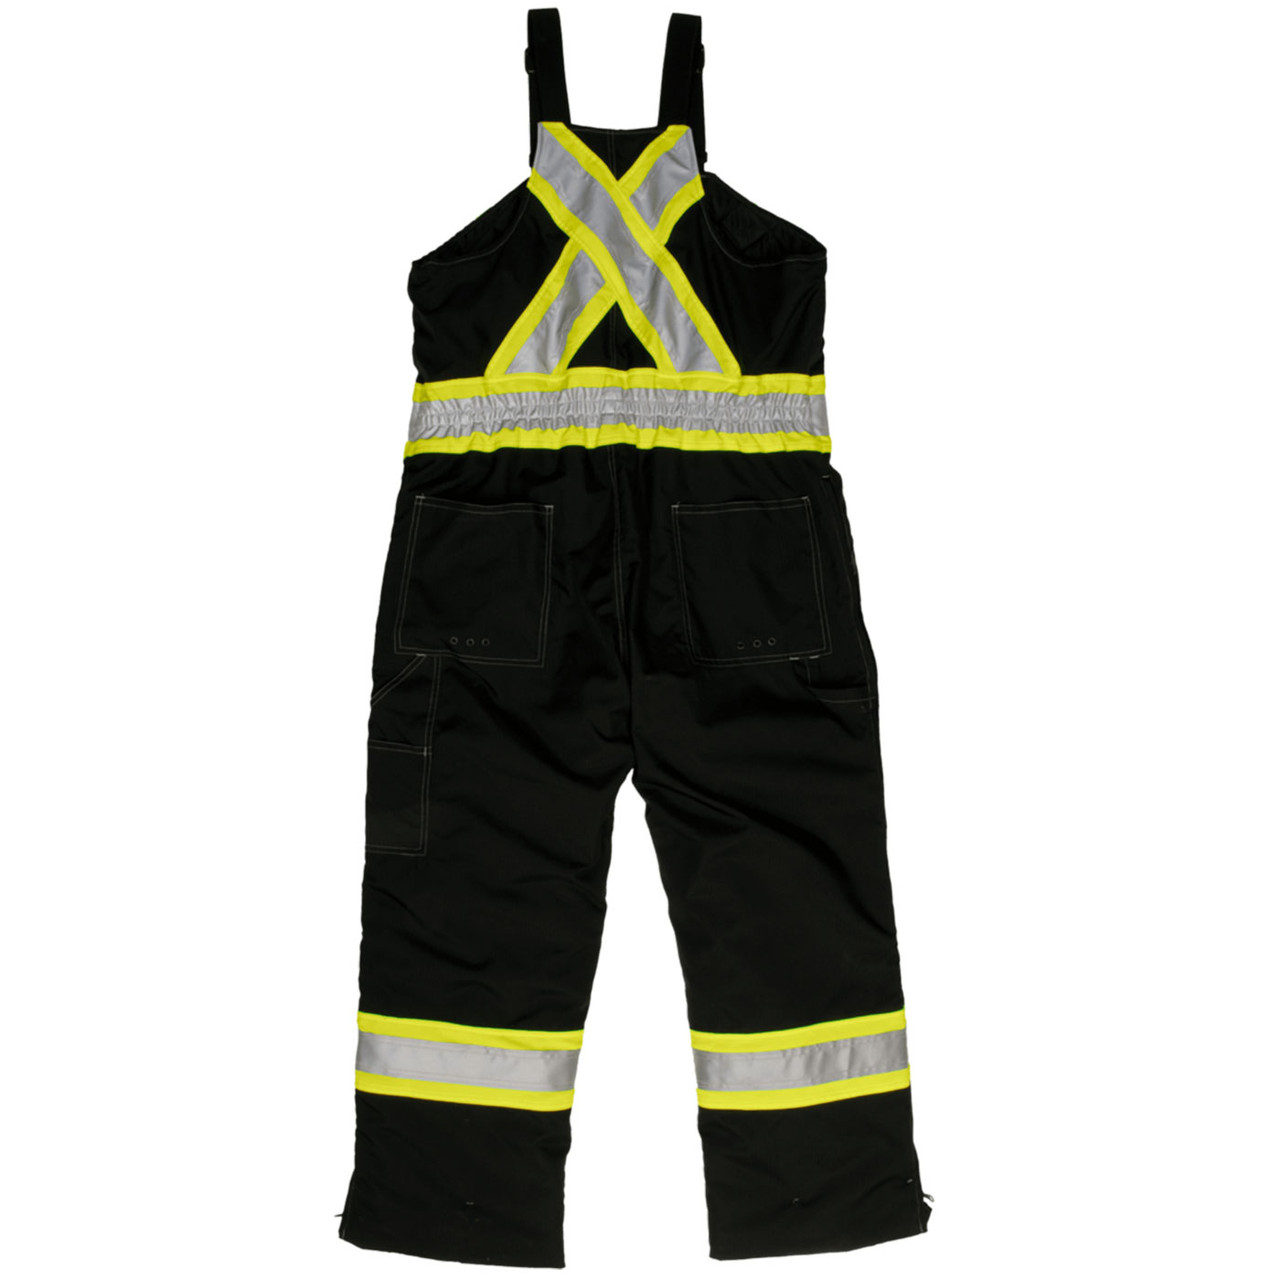 Waterproof Coveralls, Workwear & Protective Clothing